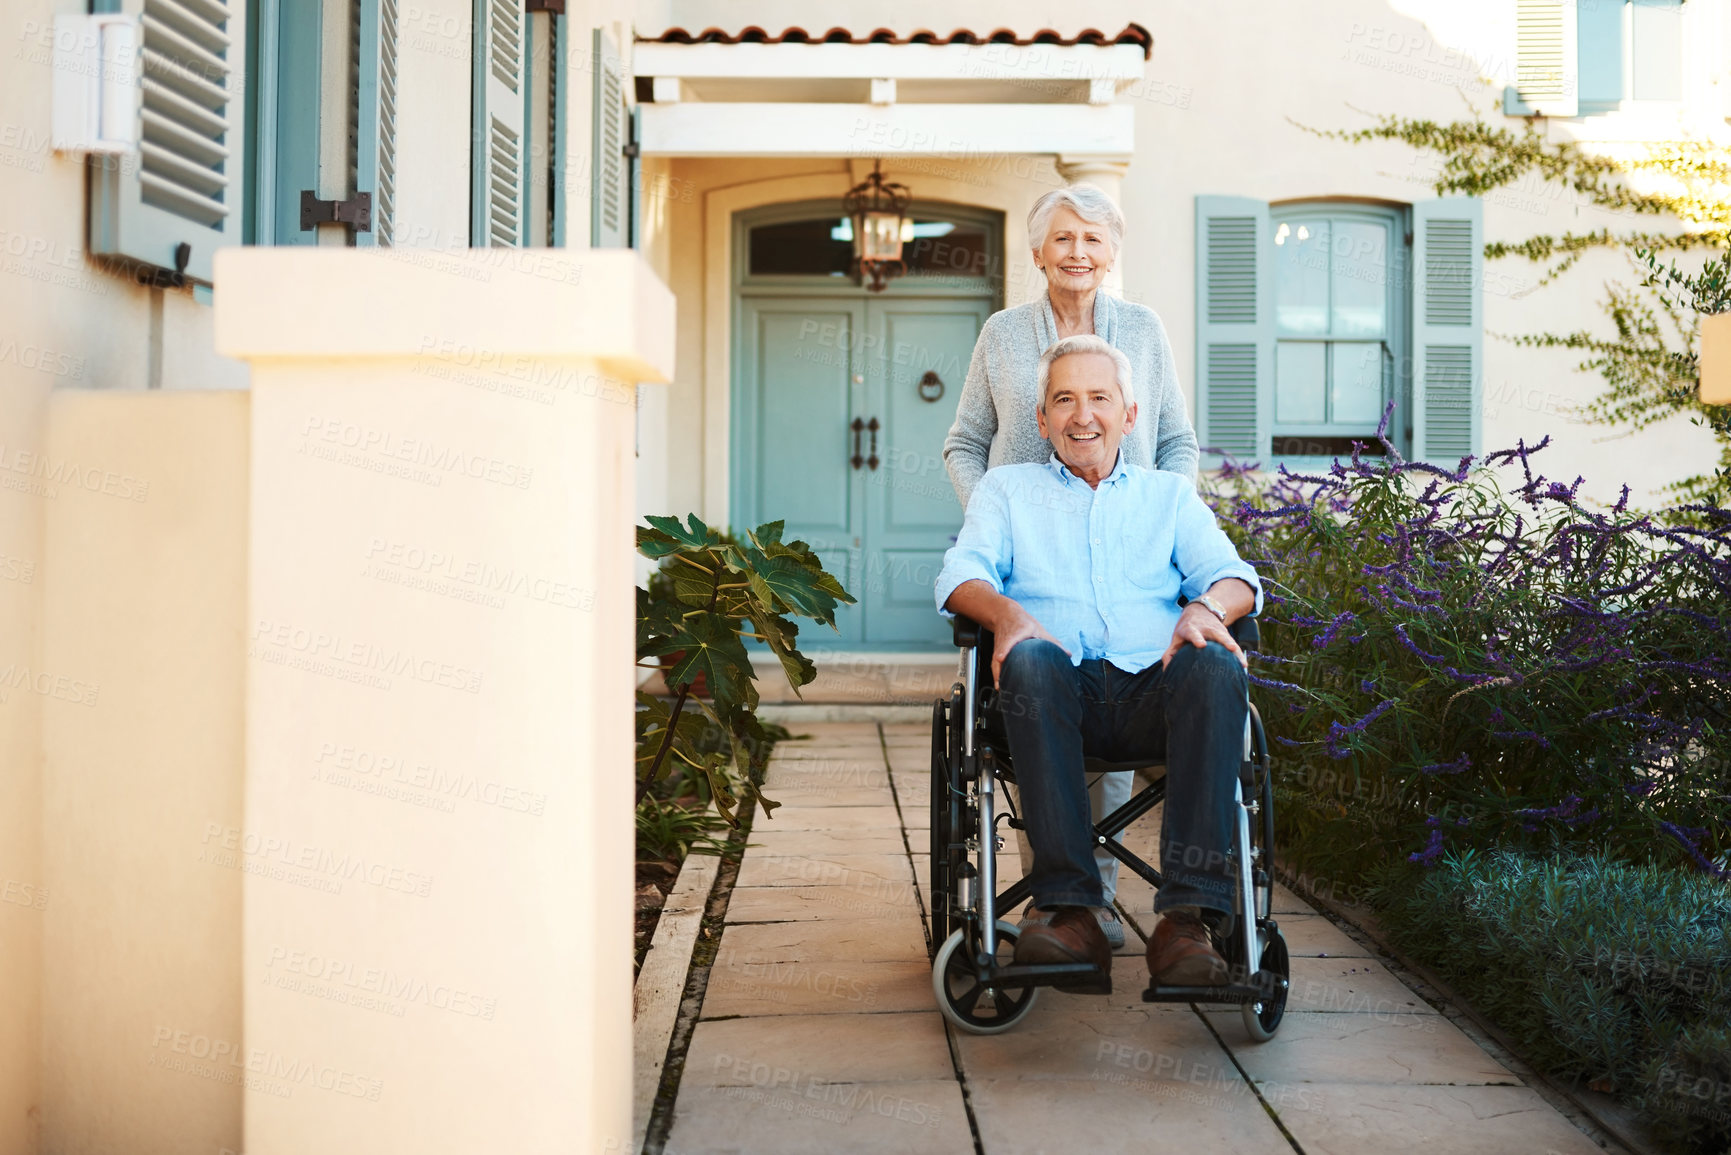 Buy stock photo Full length shot of a cheerful wheelchair bound senior man relaxing with his wife in their backyard at home